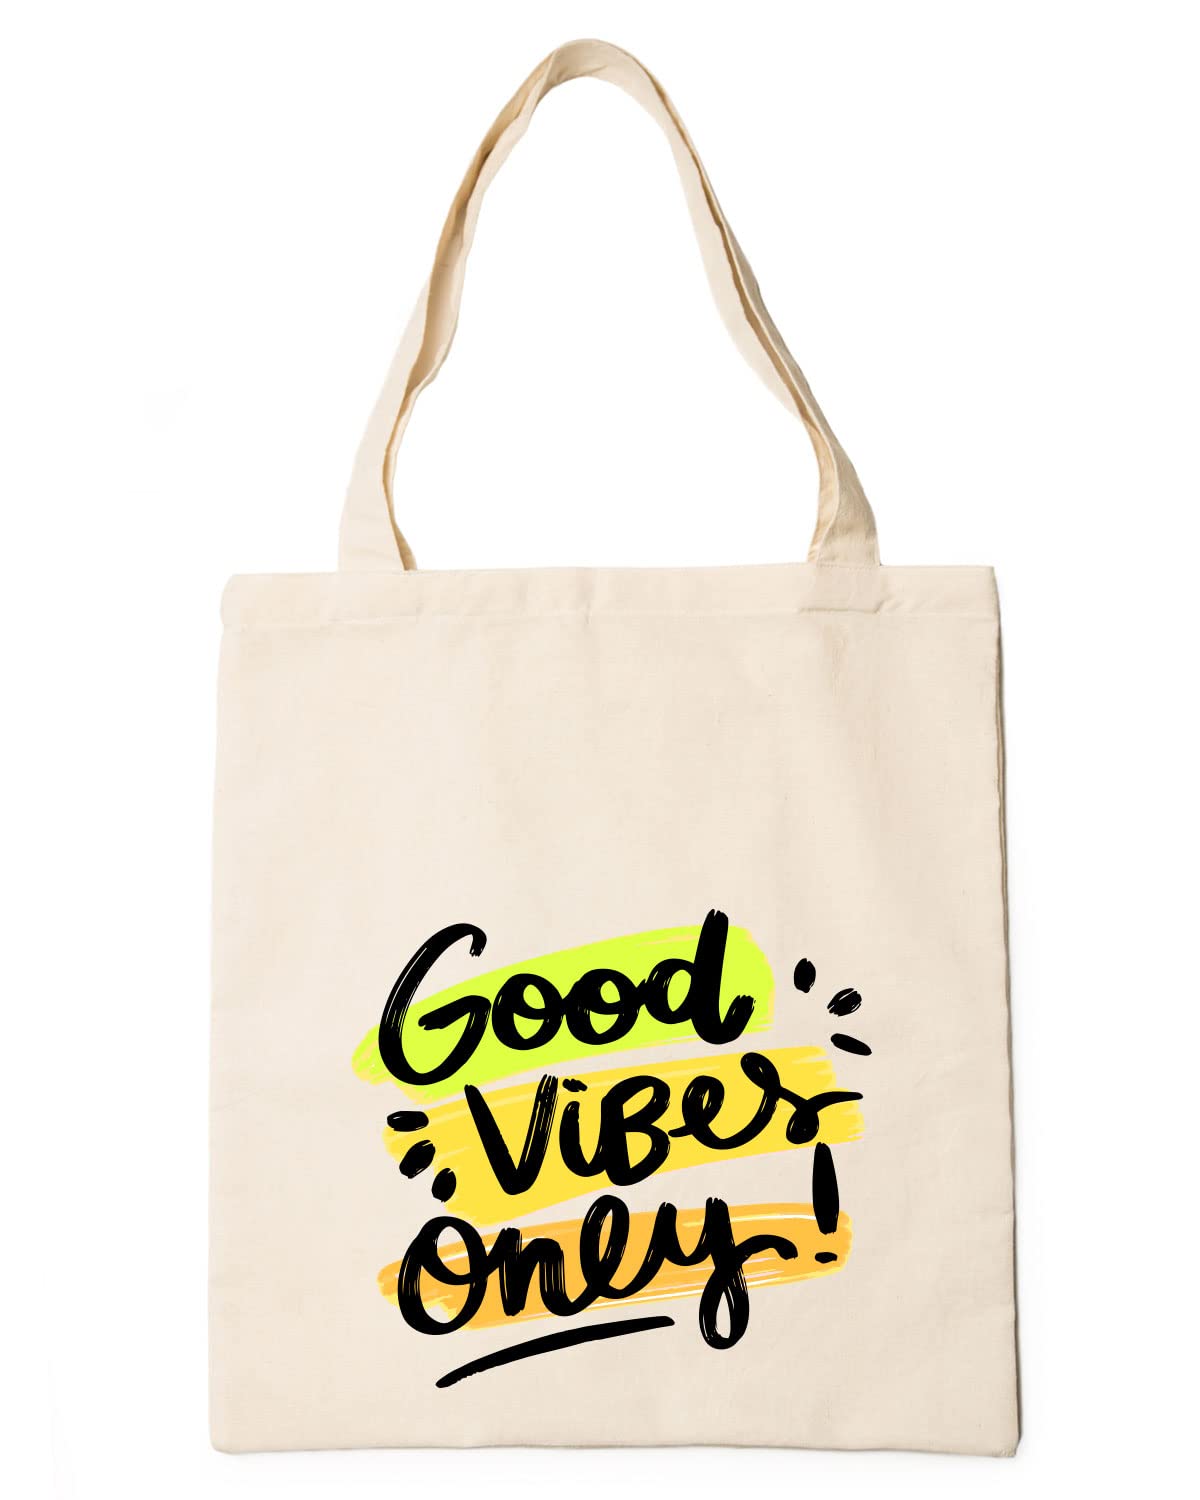 The Pink Magnet Good Vibes Only Tote Bag - Canvas Tote Bag for Women | Printed Multipurpose Cotton Bags | Cute Hand Bag for Girls | Best for College, Travel, Grocery | Reusable Shopping Bag | Eco-Friendly Tote Bag